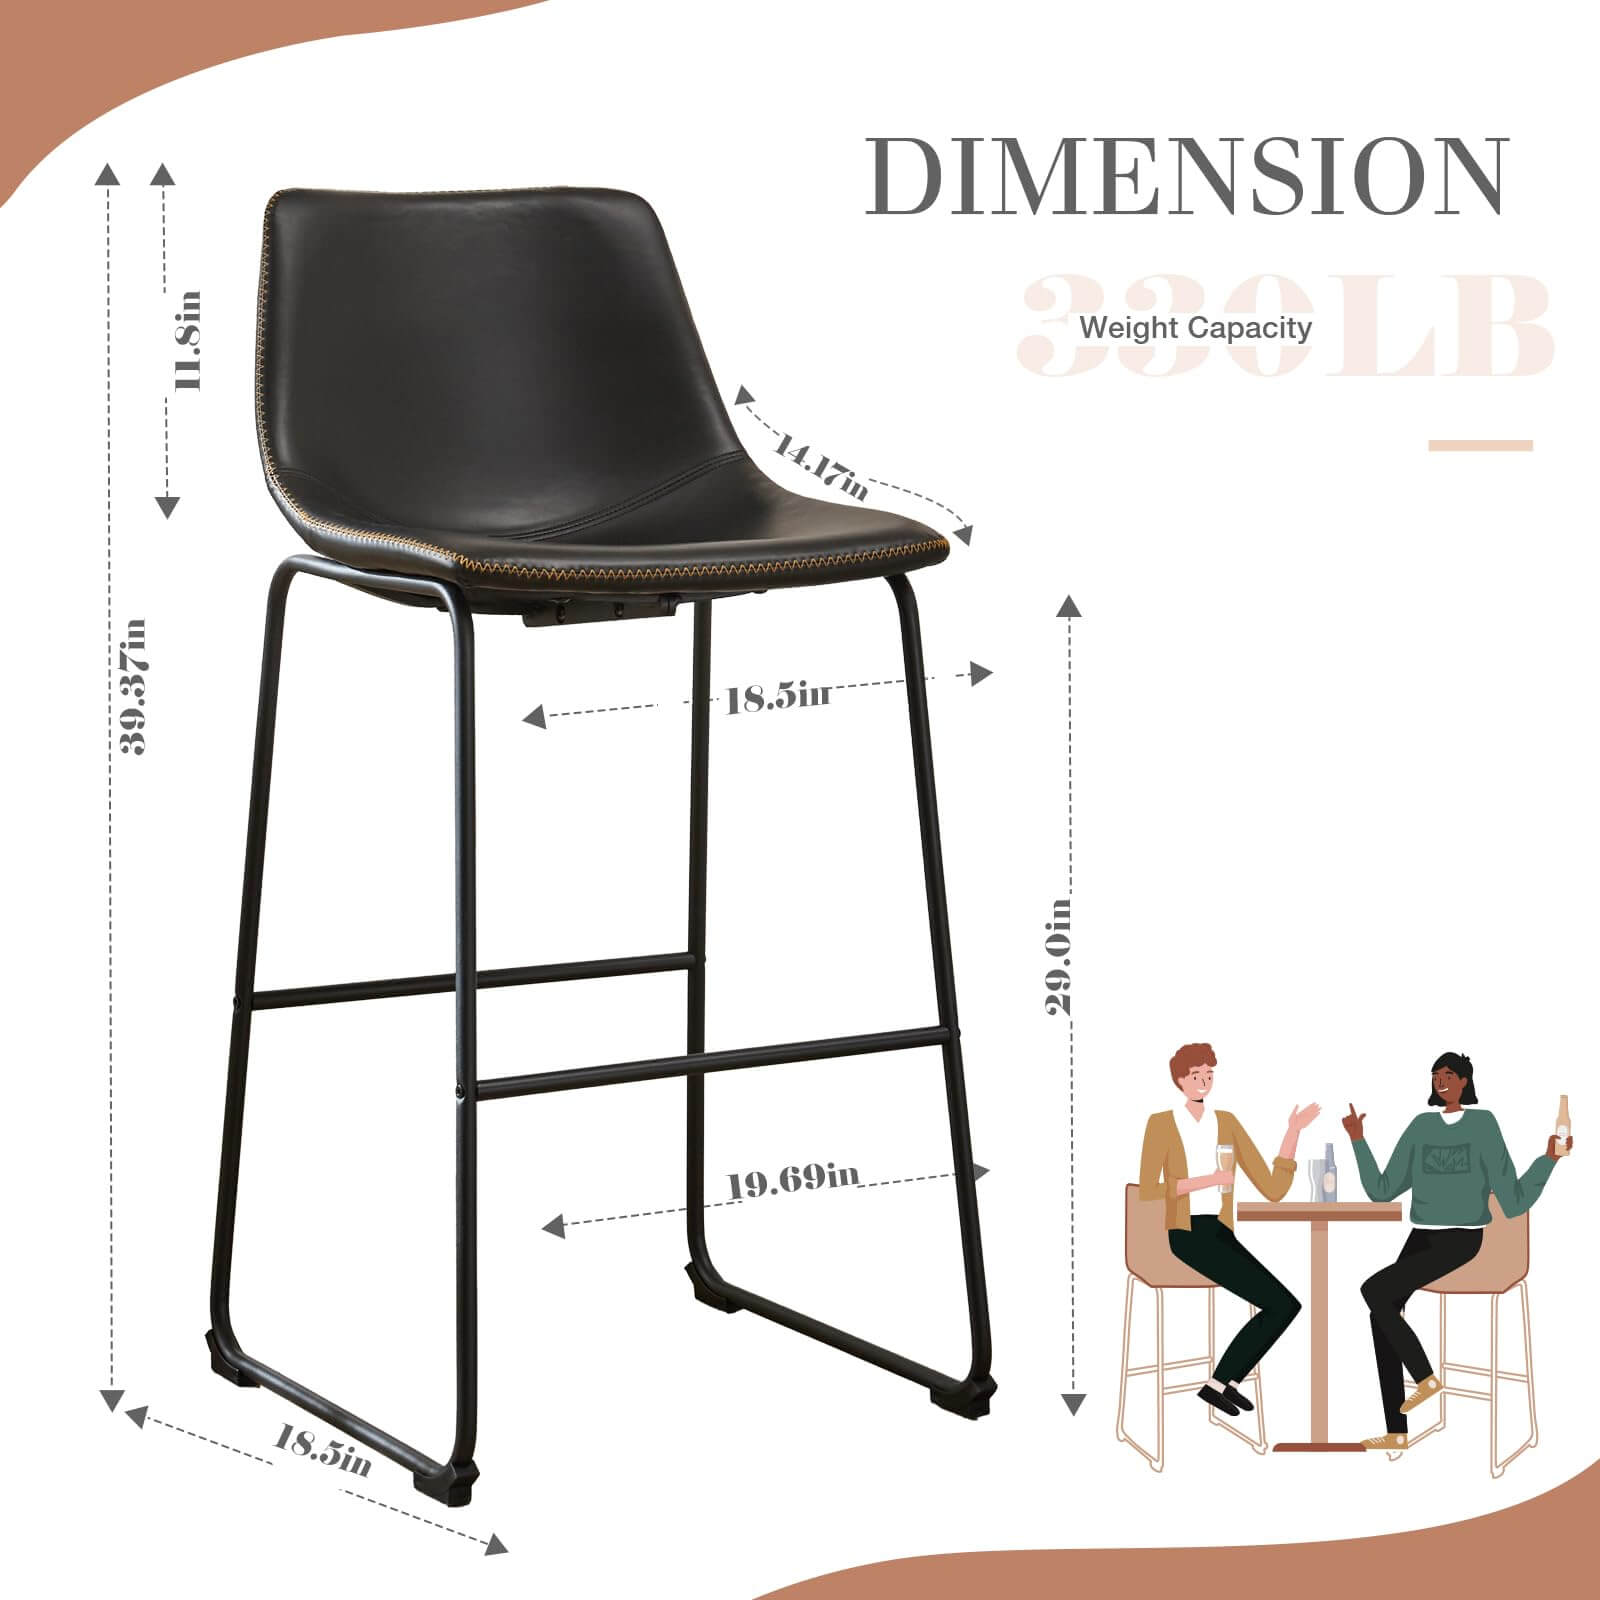 30-inch-dining-chairs#Color_Black#Size_30 in